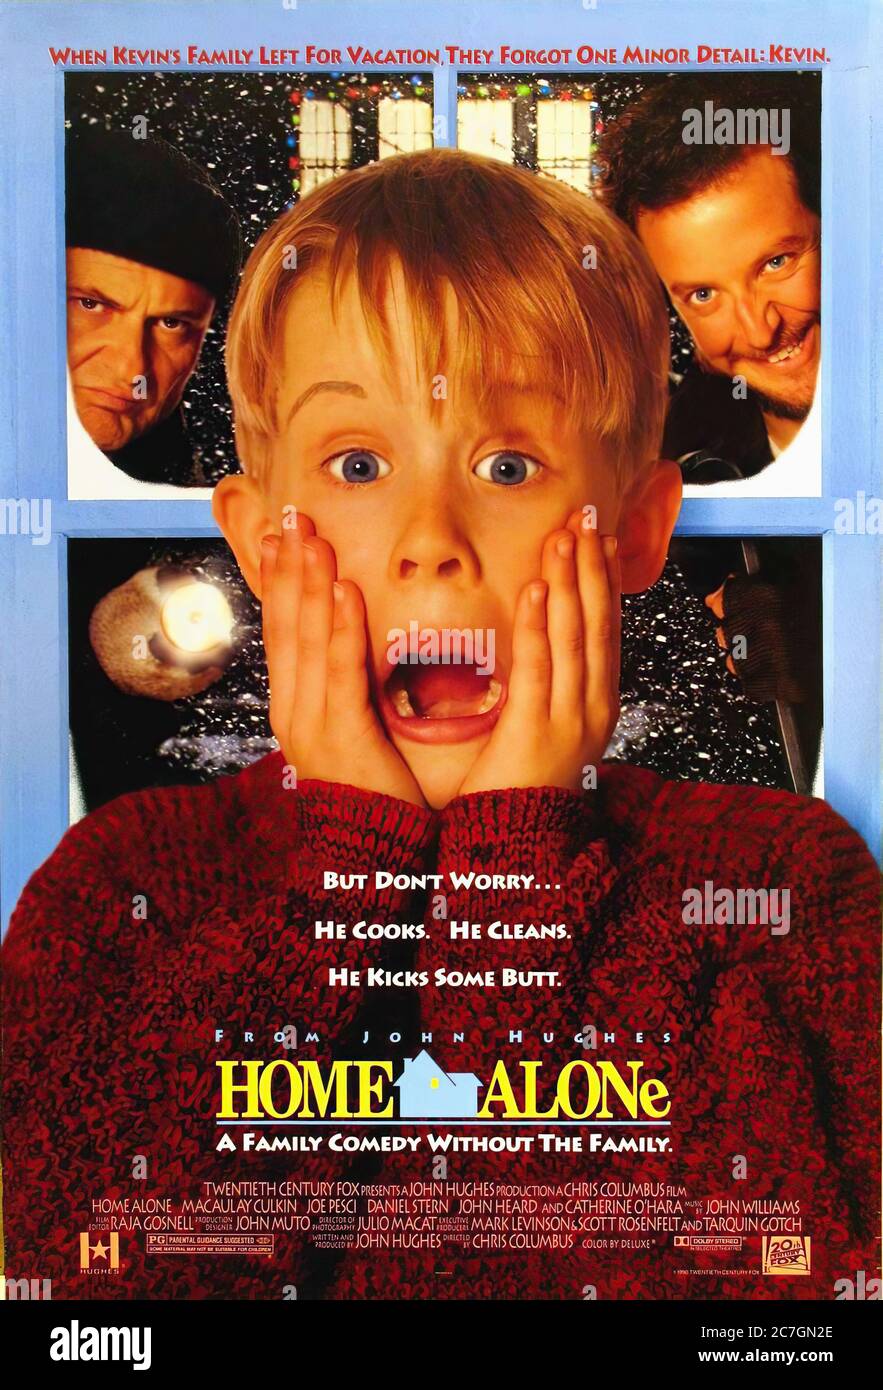 Home Alone - Movie Poster Stock Photo